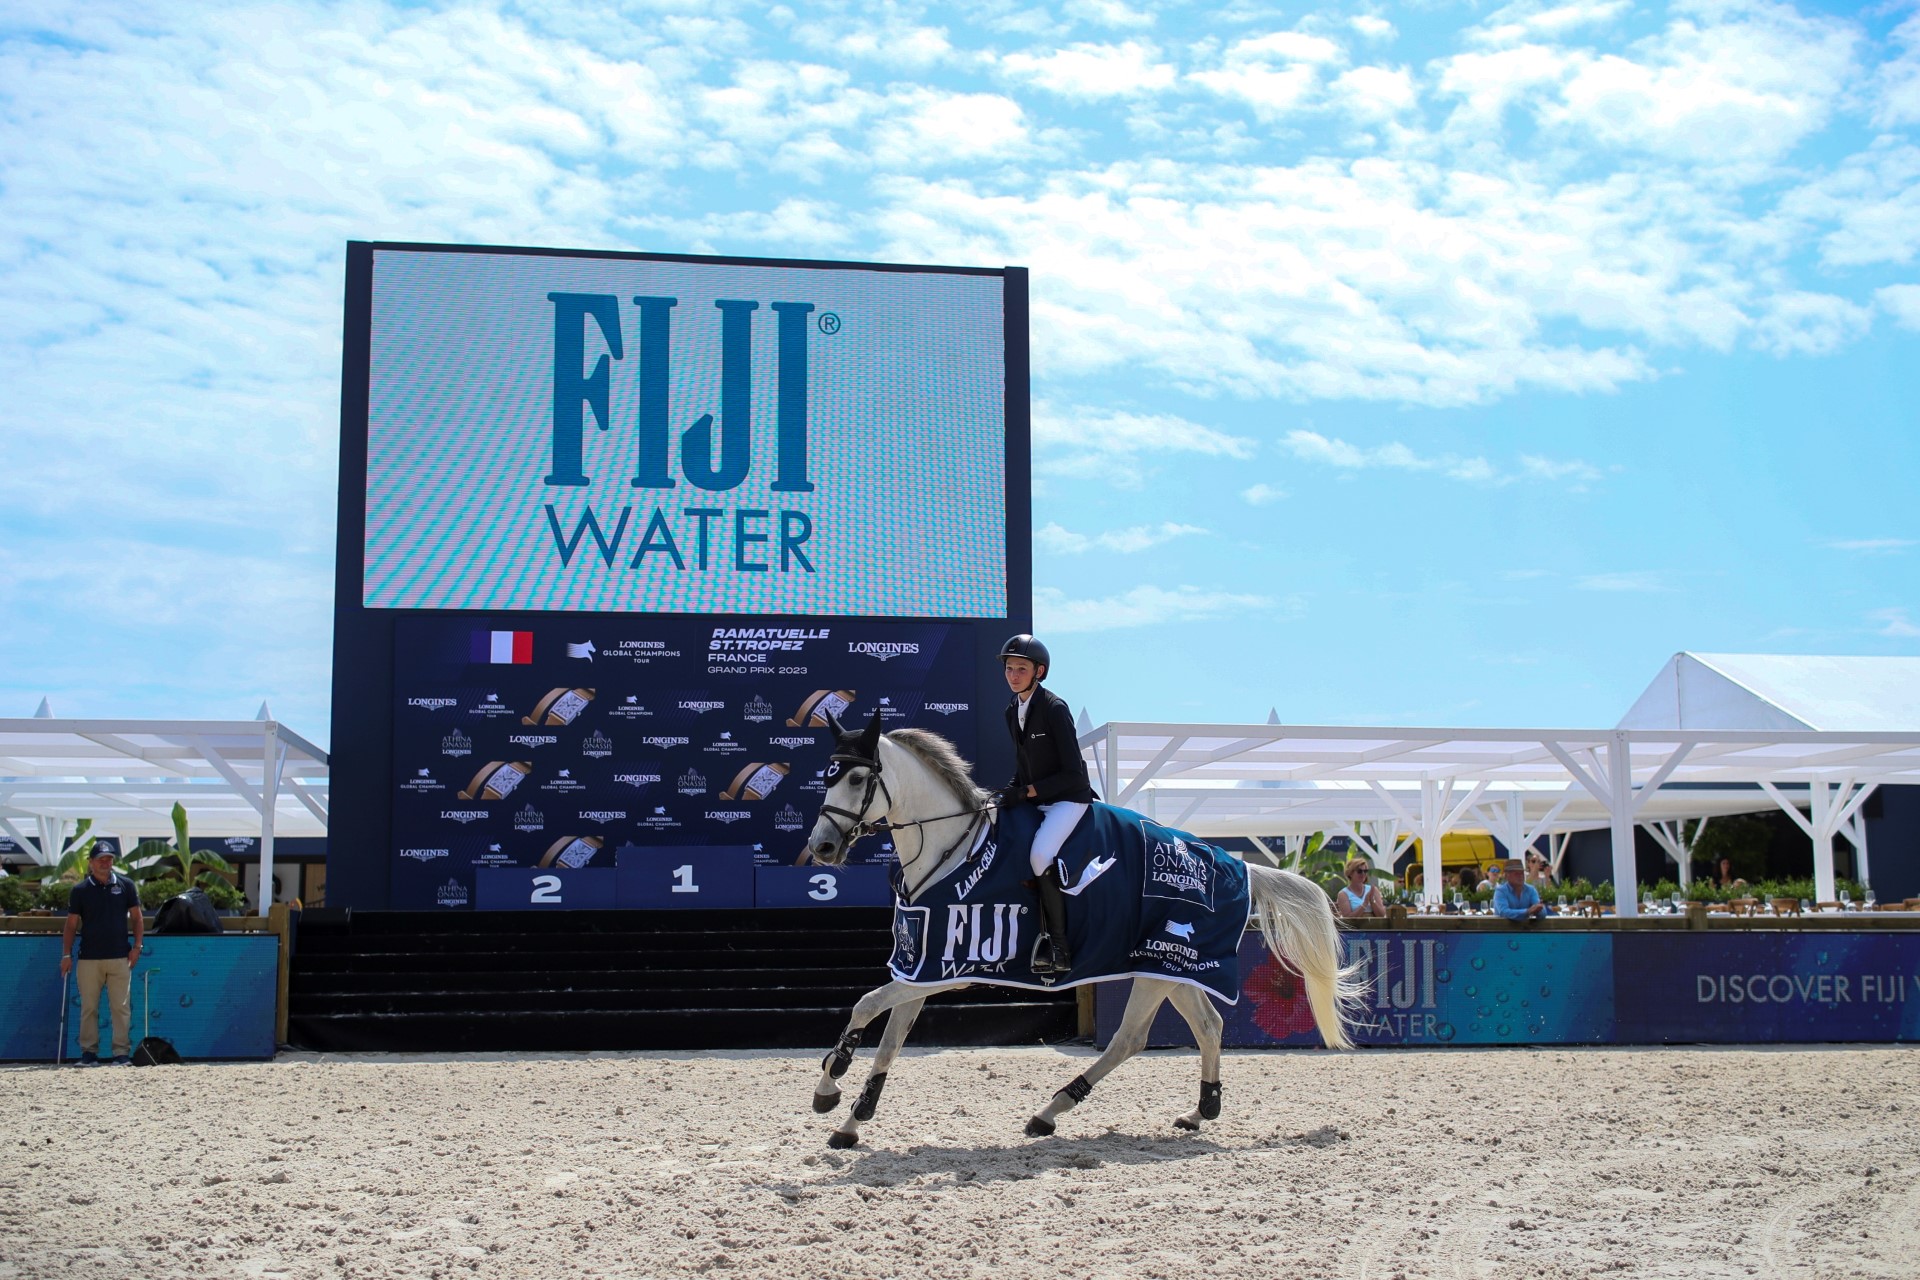 FIJI Water is delighted to partner with @longines_aohs for the incredible Longines Athina Onassis Horse Show, held in St Tropez this weekend.